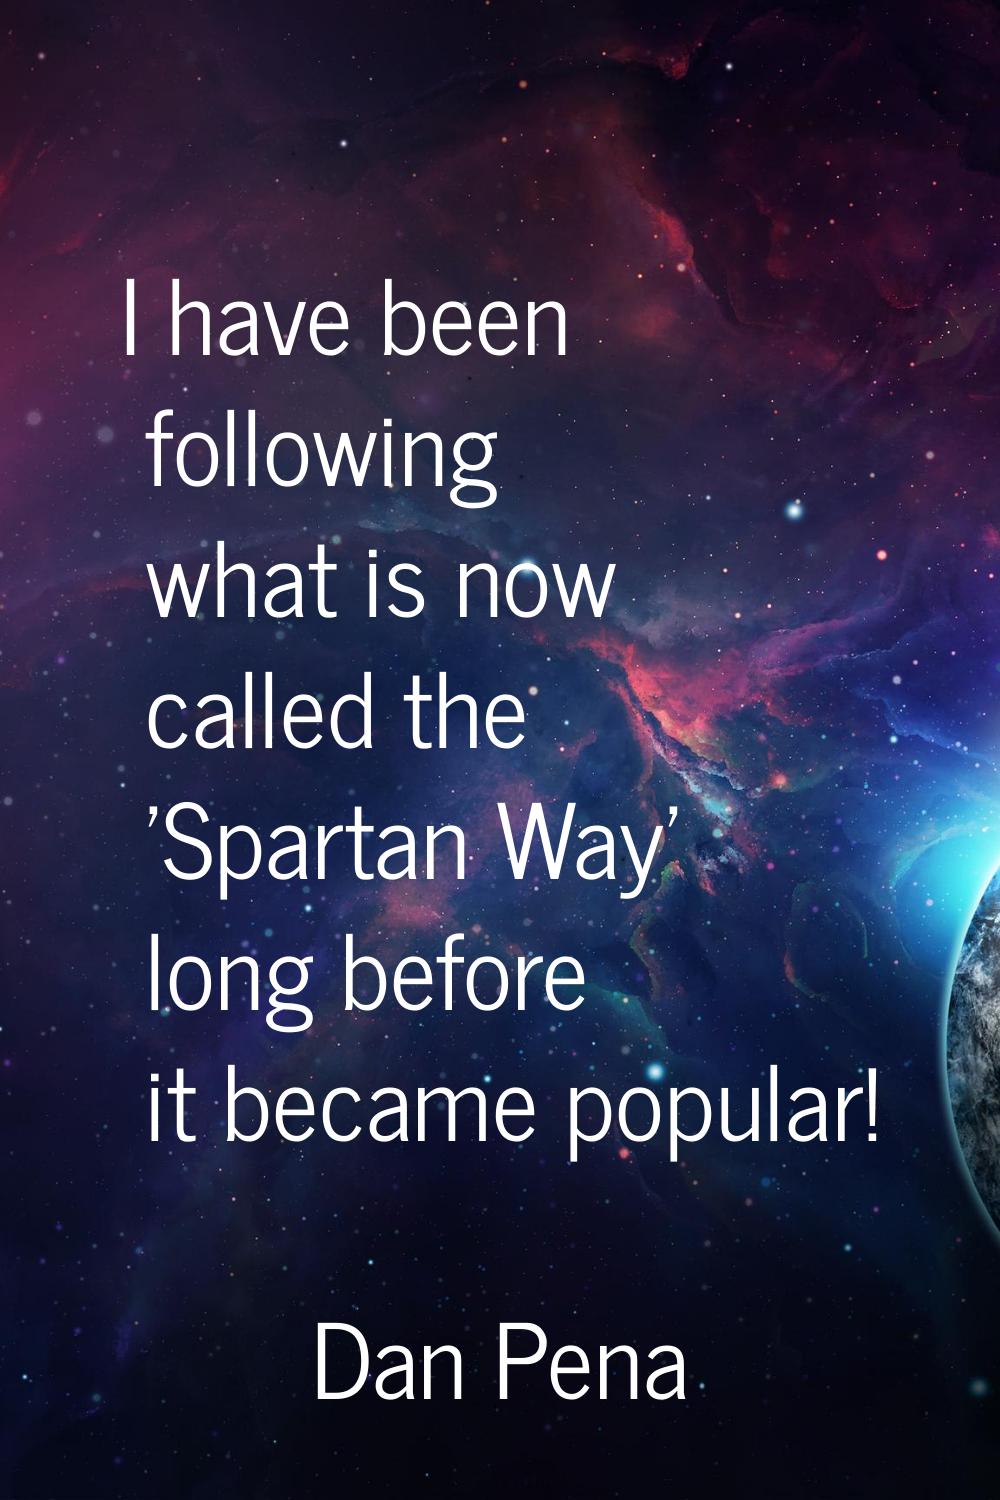 I have been following what is now called the 'Spartan Way' long before it became popular!